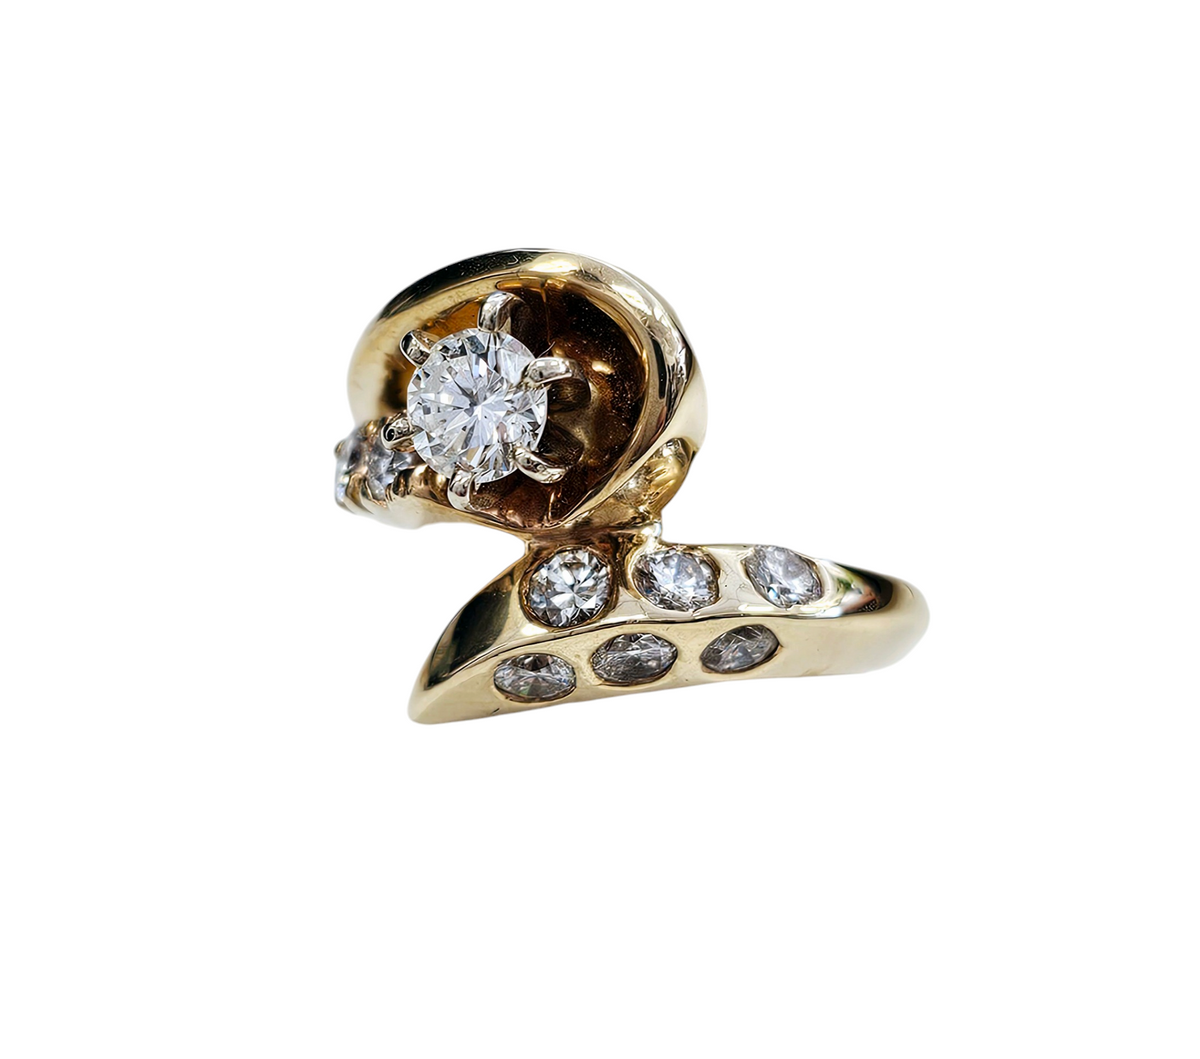 Diamond Bypass Style Engagement Ring with Prong and Burnished Diamonds made in 14-Karat Yellow Gold